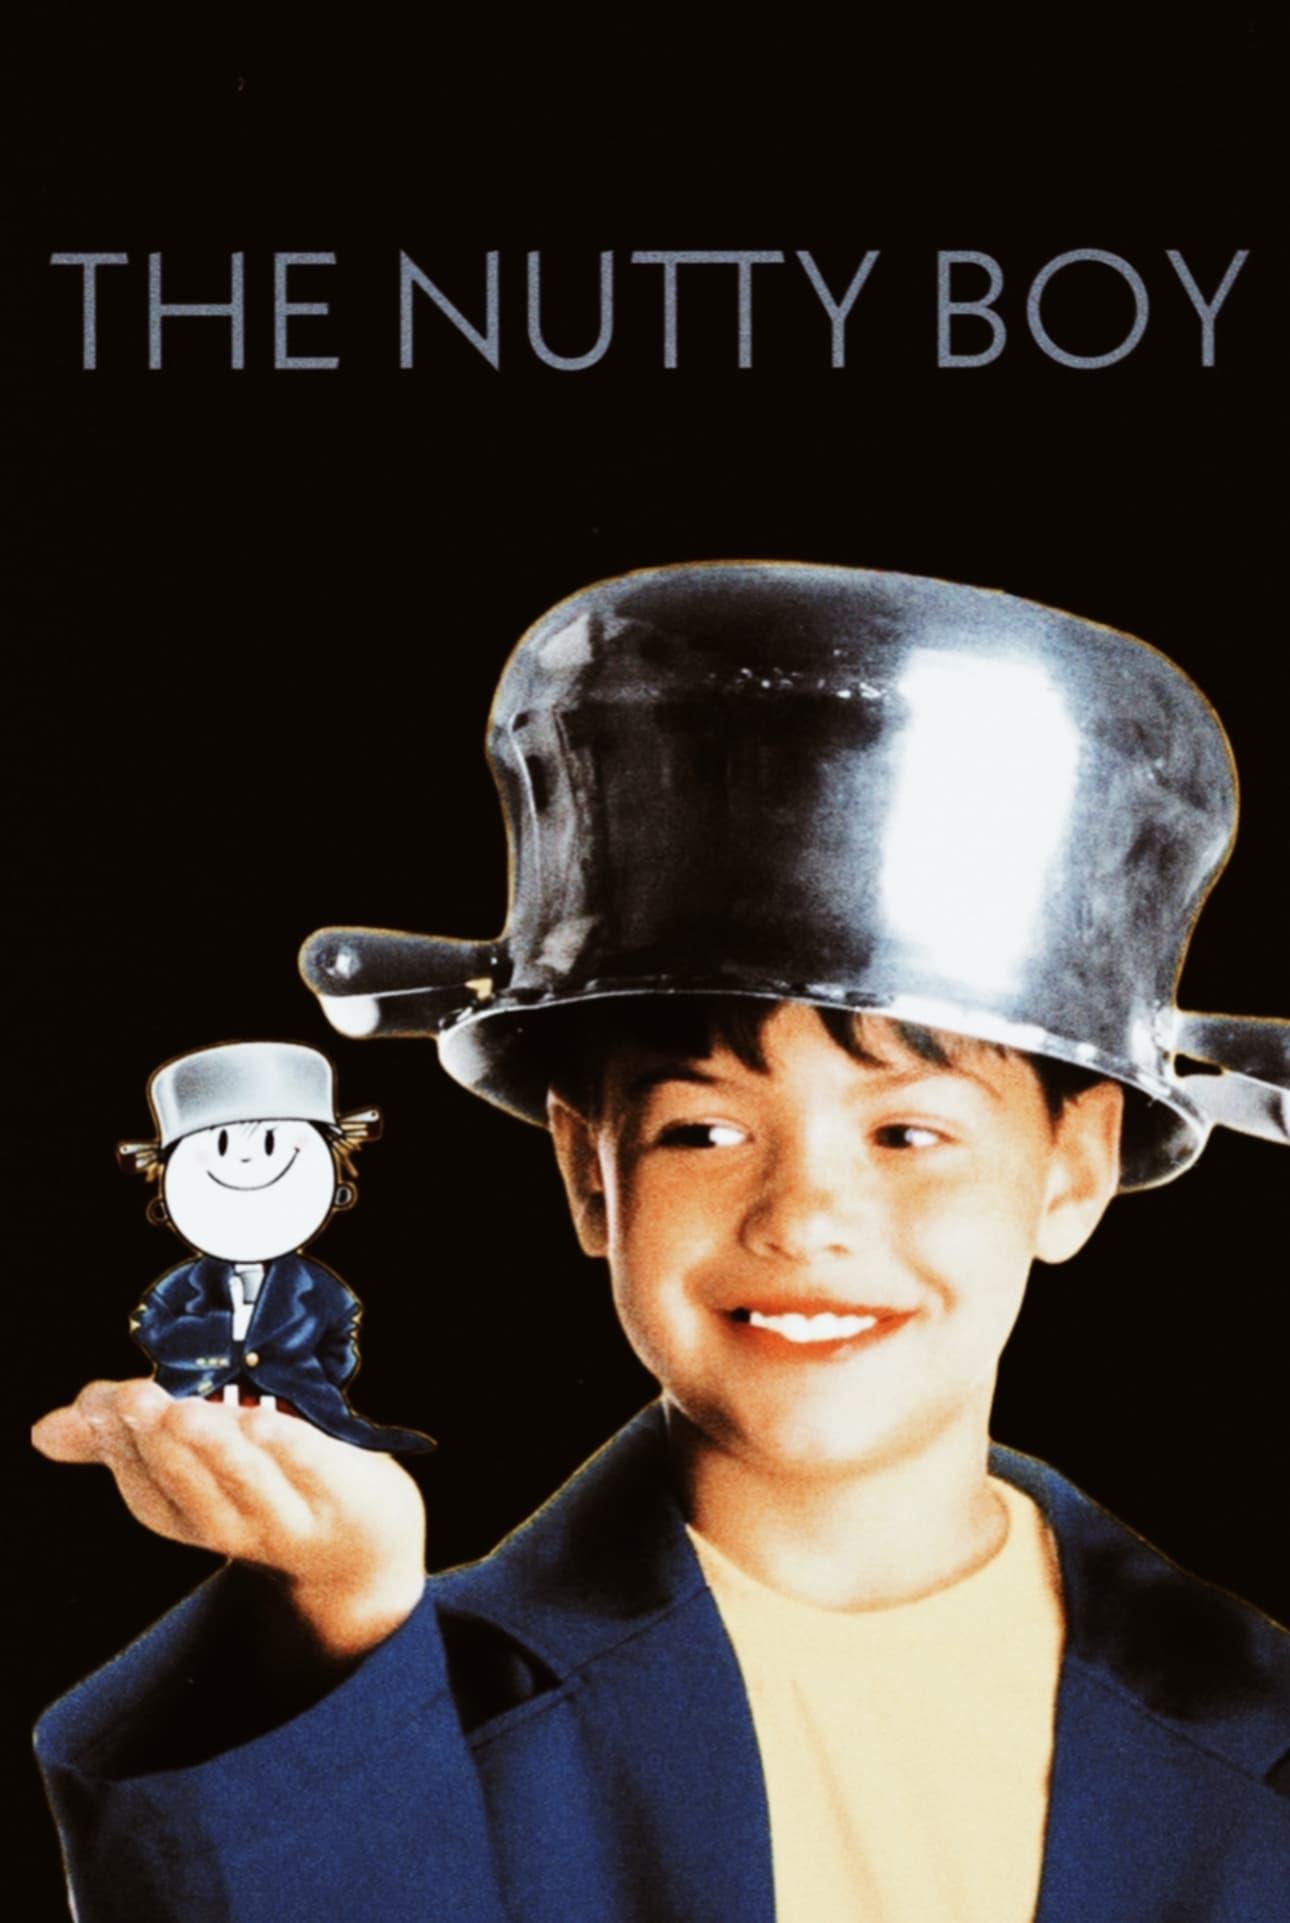 The Nutty Boy poster